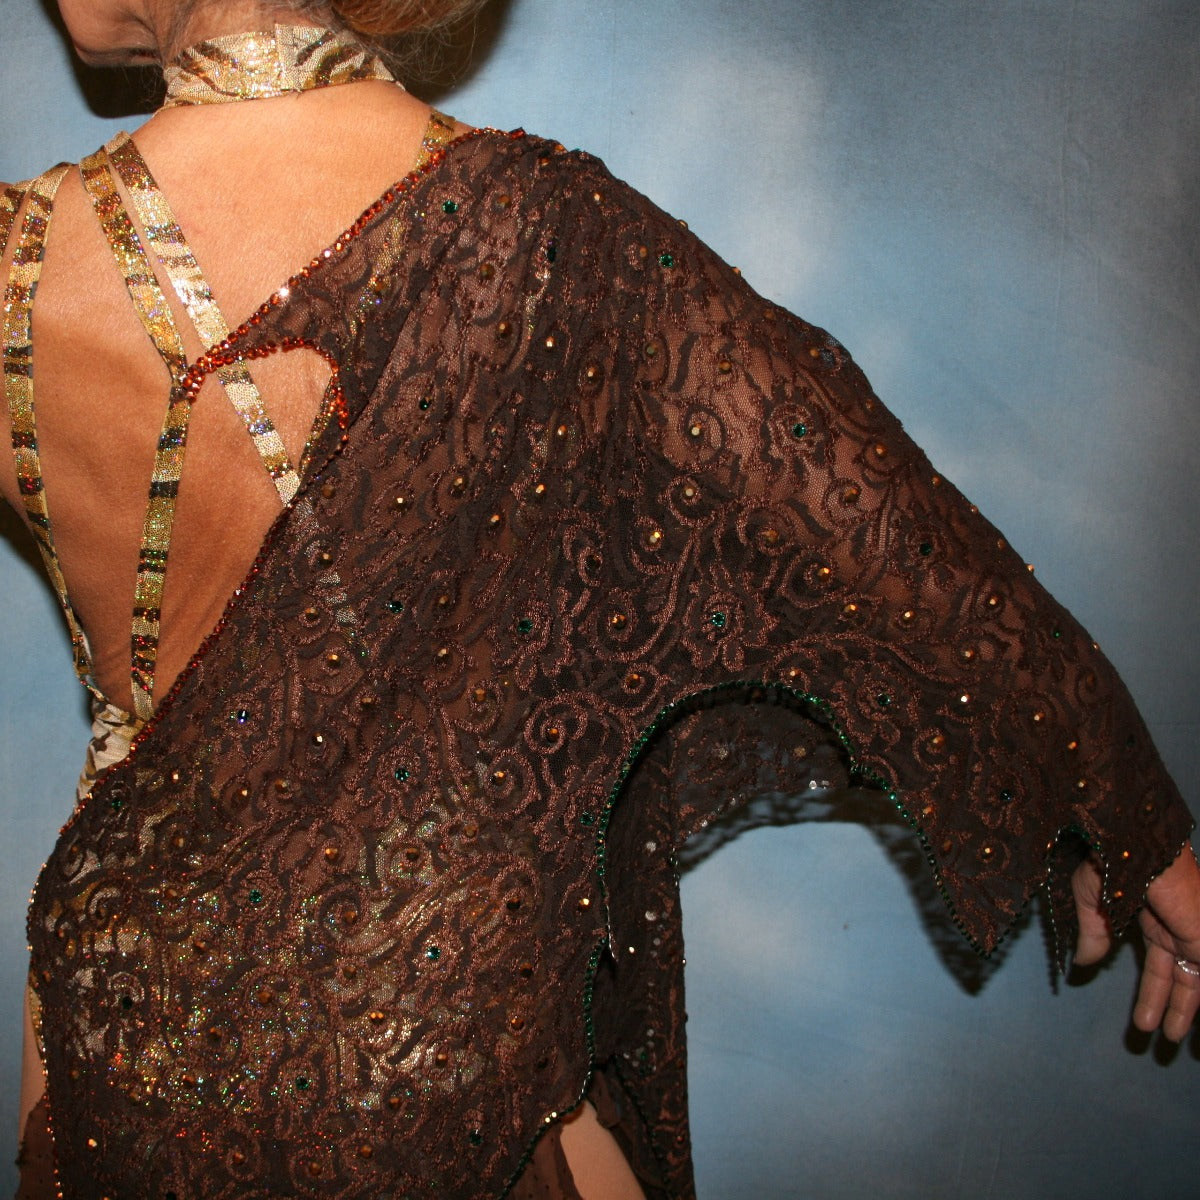 Crystal's Creations close up back view of Gold tango dress or Latin/rhythm dress created in chocolate brown stretch lace that is lavishly embellished with gold & a touch of emerald green Swarovski rhinestones overlayed & draped over a golden hologram tiger print bodysuit size 3/4-9/10